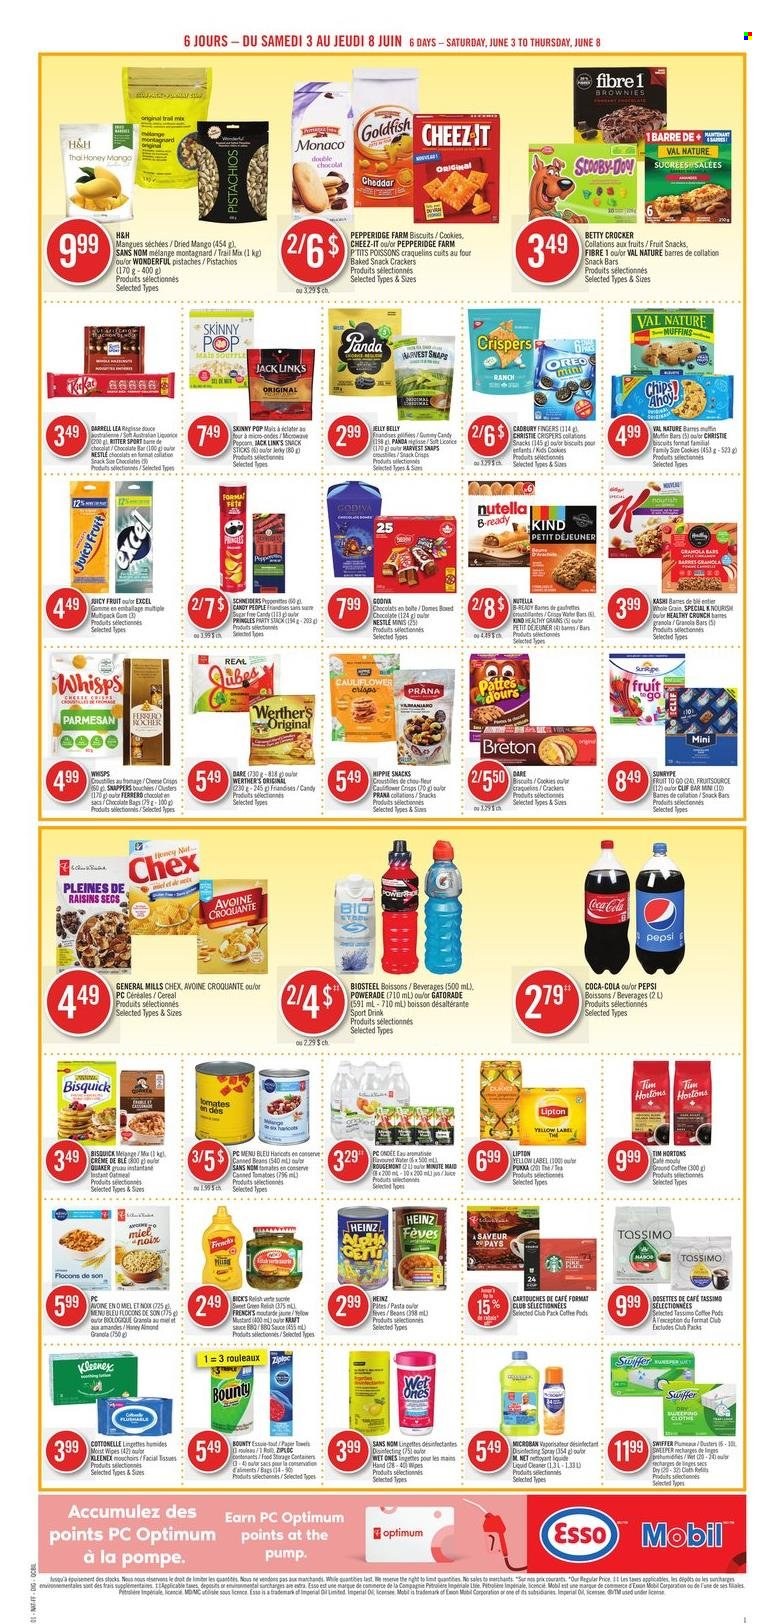 thumbnail - Pharmaprix Flyer - June 03, 2023 - June 08, 2023 - Sales products - brownies, muffin, tomatoes, mango, pasta, sauce, Quaker, jerky, parmesan, cheese, Oreo, cookies, Bounty, jelly, crackers, biscuit, Cadbury, Ritter Sport, fruit snack, snack bar, chocolate bar, Candy, Werther's Original, General Mills, Pringles, Goldfish, Cheez-It, Skinny Pop, Jack Link's, salty snack, Bisquick, Harvest Snaps, canned tomatoes, cereals, granola bar, honey, raisins, dried fruit, pistachios, trail mix, Coca-Cola, Powerade, Pepsi, energy drink, soft drink, Gatorade, fruit punch, water, coffee, coffee pods, ground coffee, wipes, Cottonelle, Kleenex, cleaner, liquid cleaner, Swiffer, antibacterial spray, Ziploc, storage box, storage container, paper, Optimum, panda, electrolyte drink, Nestlé, Heinz, Nutella, Lipton, Ferrero Rocher. Page 12.